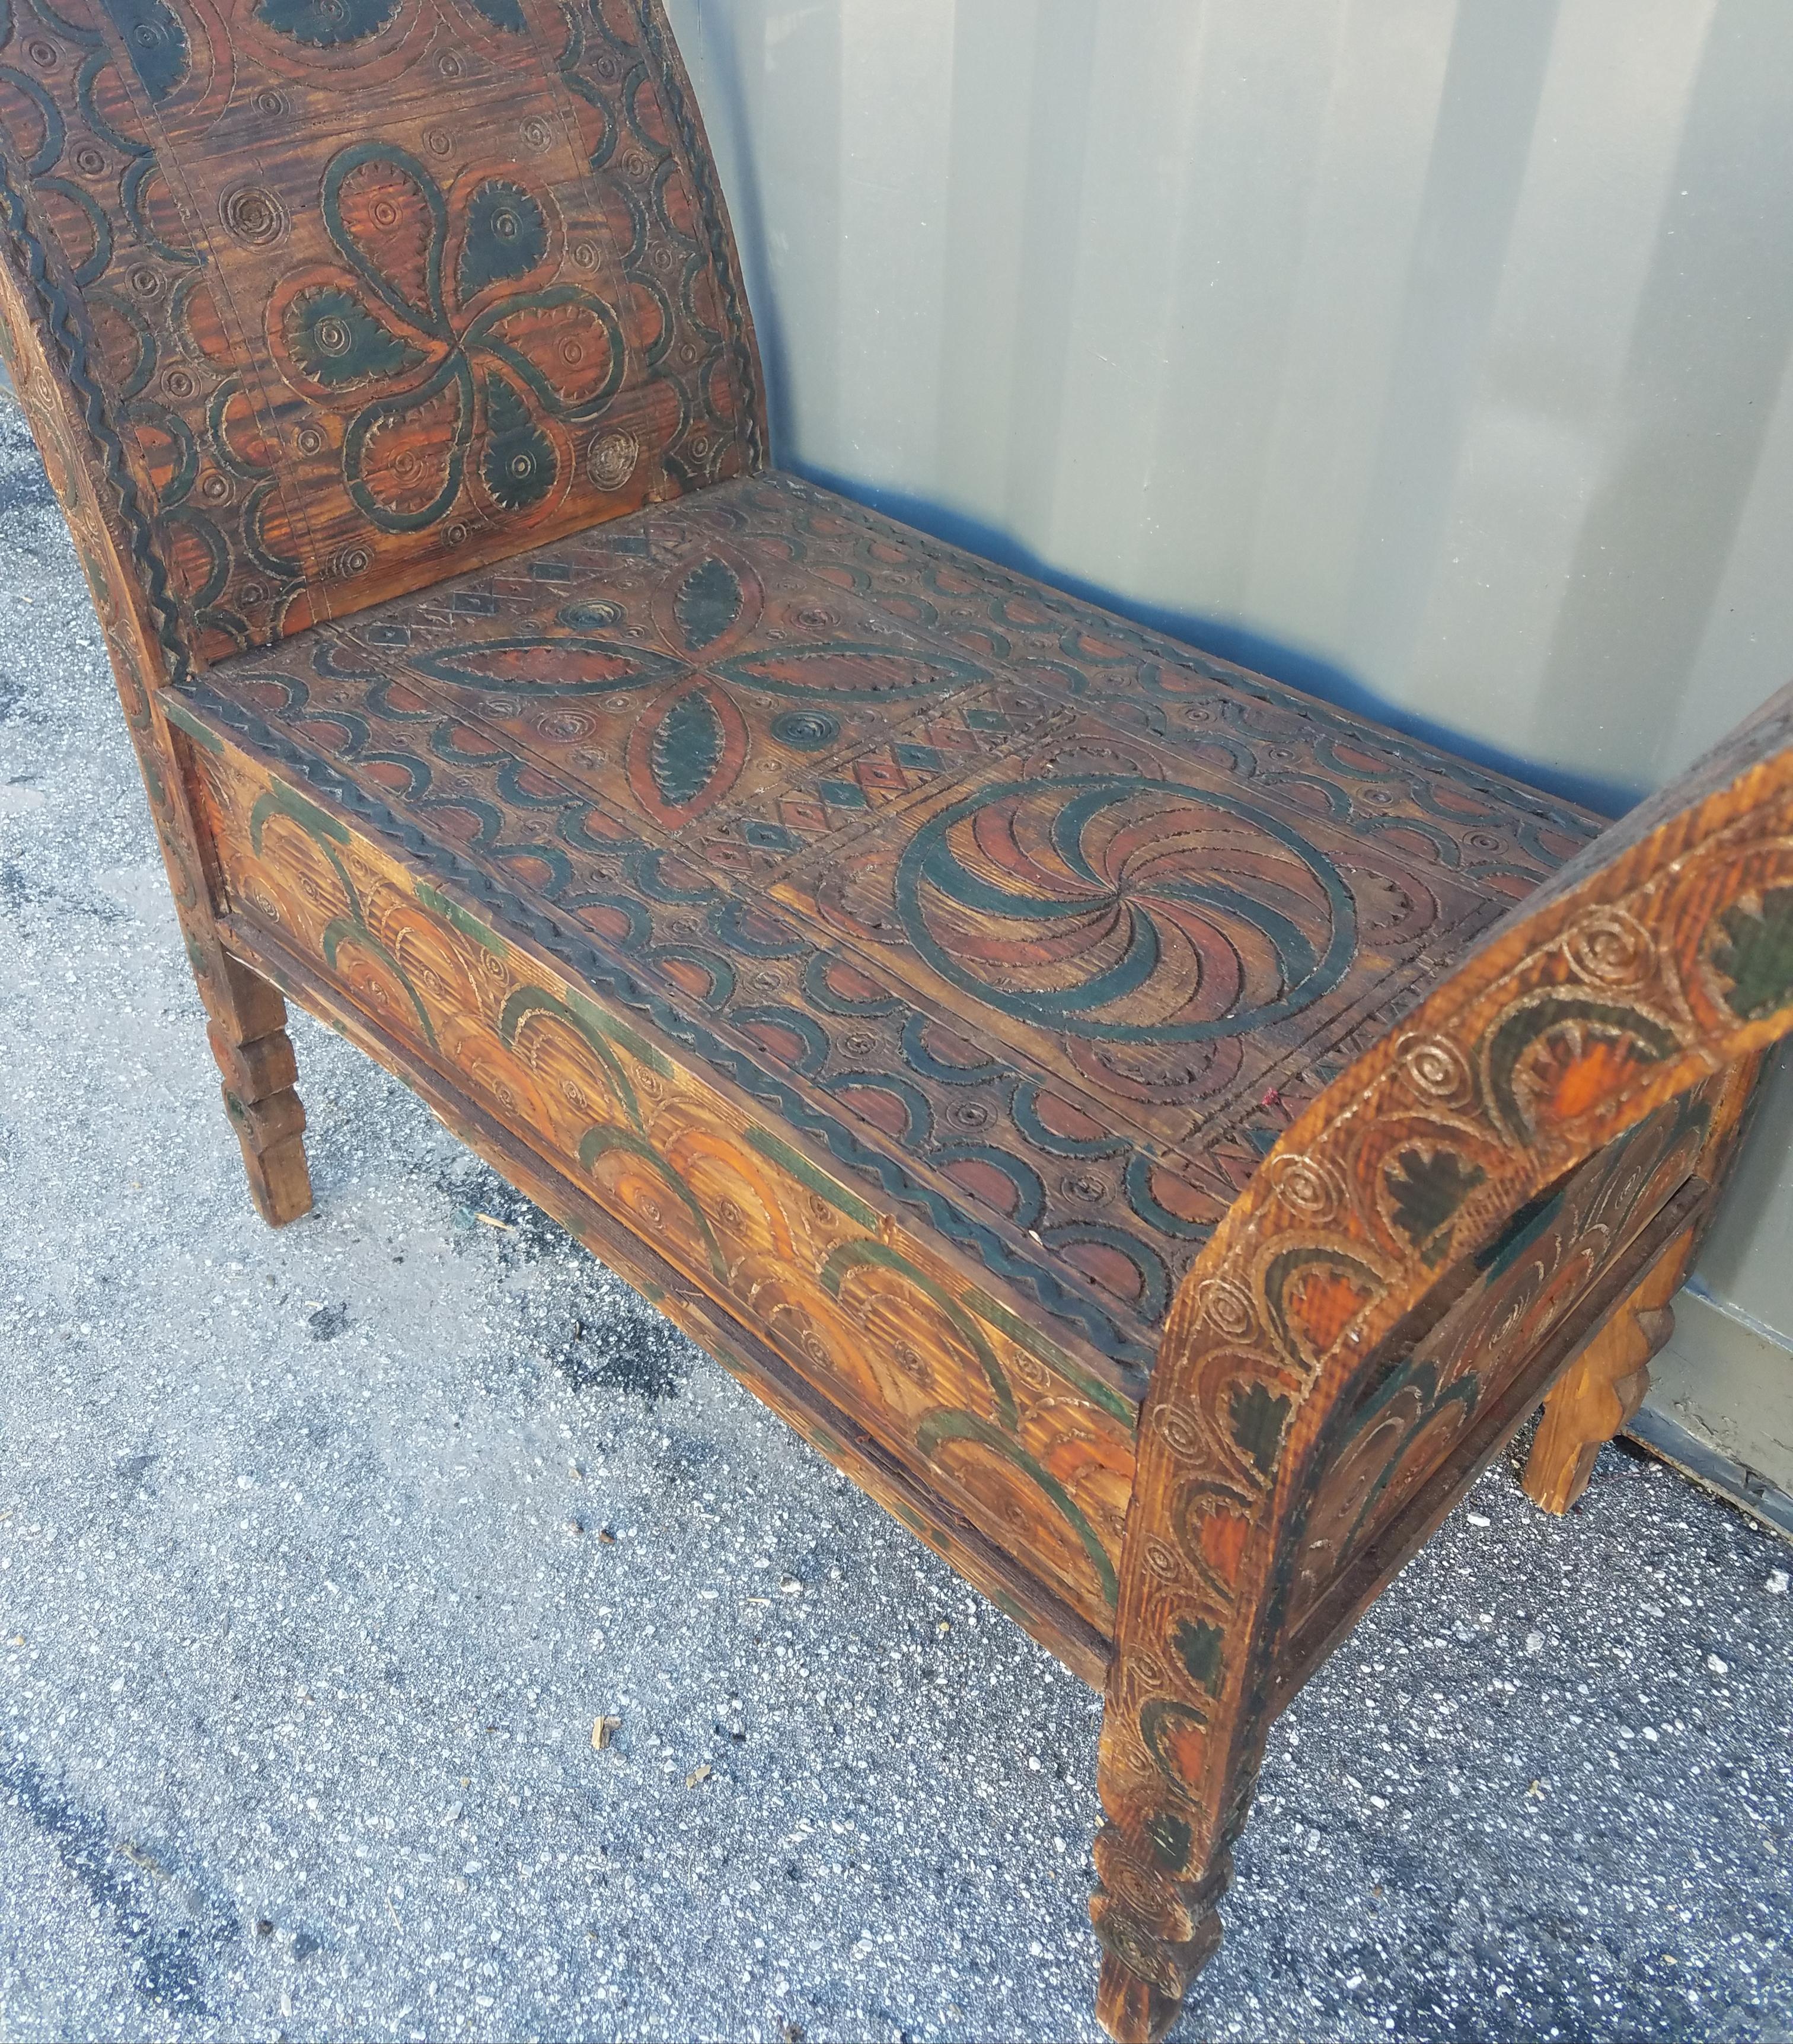 Moroccan Hand Carved Wooden Bench, Cedar Wood, 1 Seat In New Condition For Sale In Orlando, FL